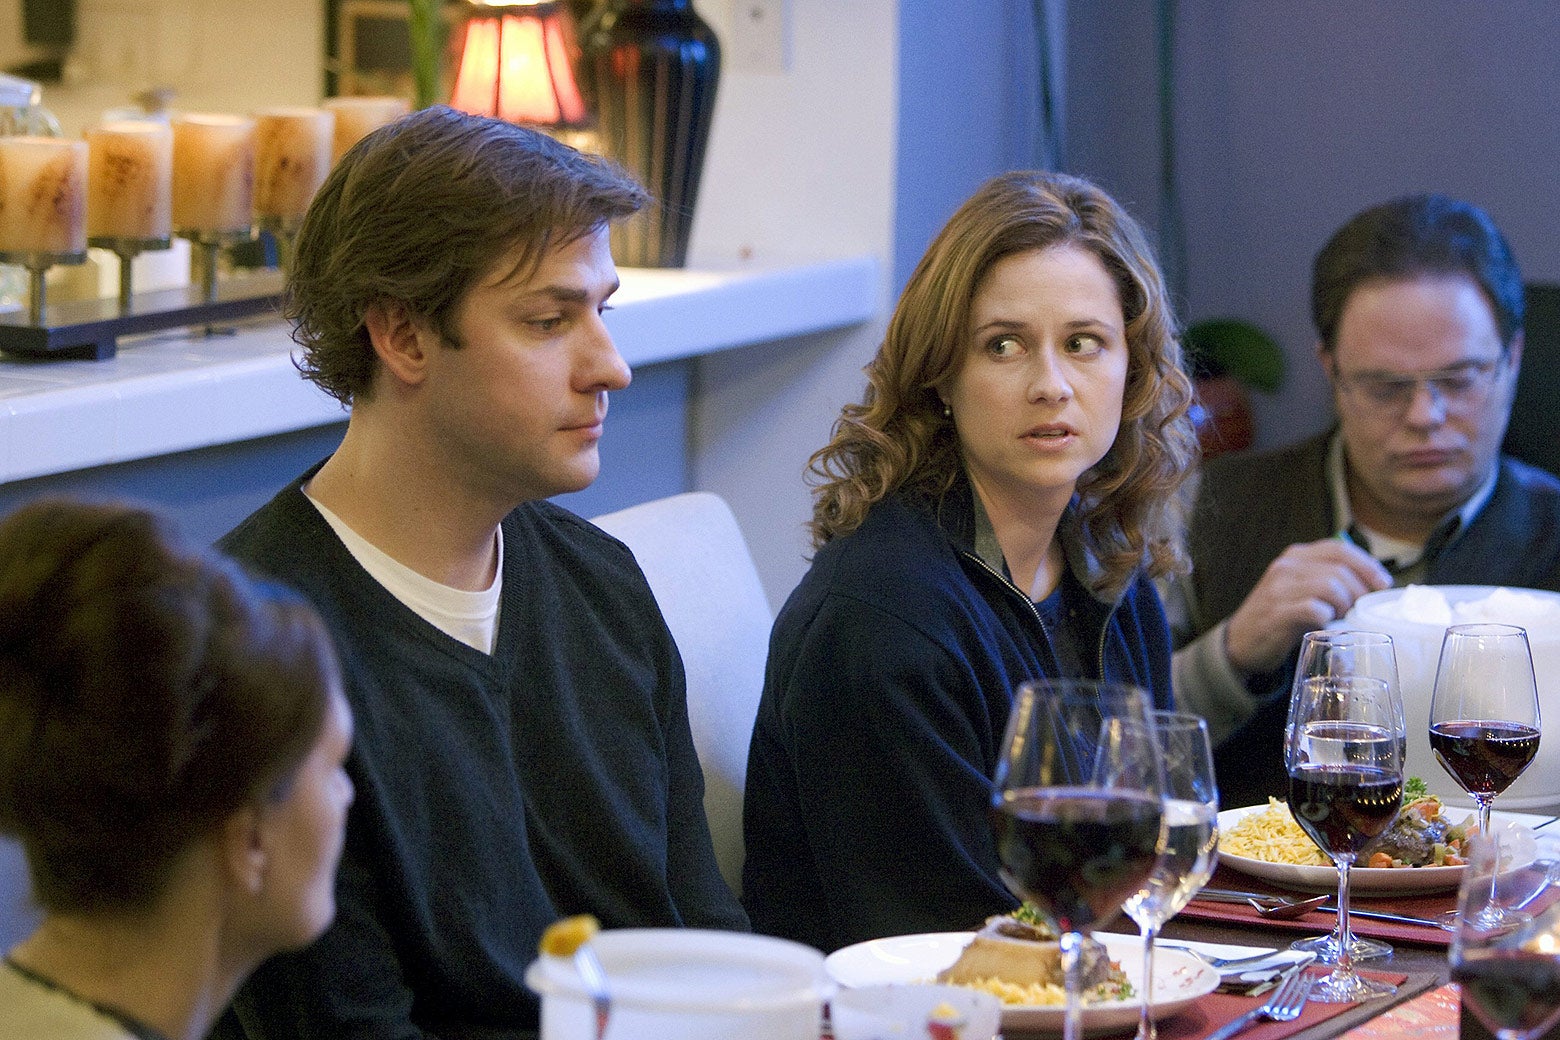 Jim and Pam, seated at a table, look uneasy.